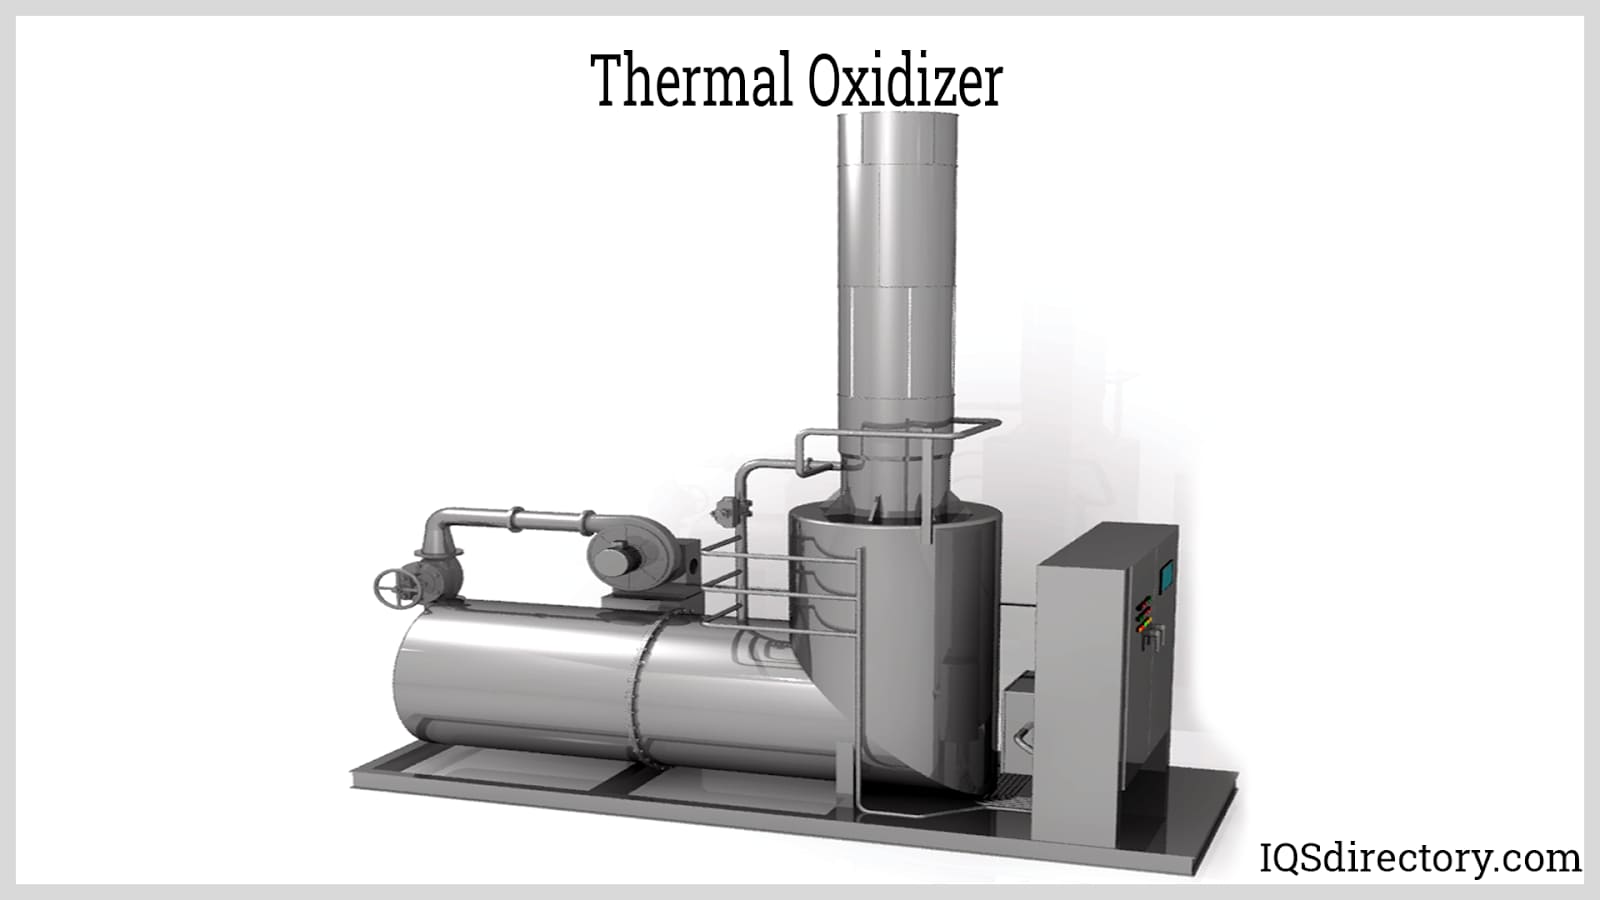 A Thermal Oxidizers